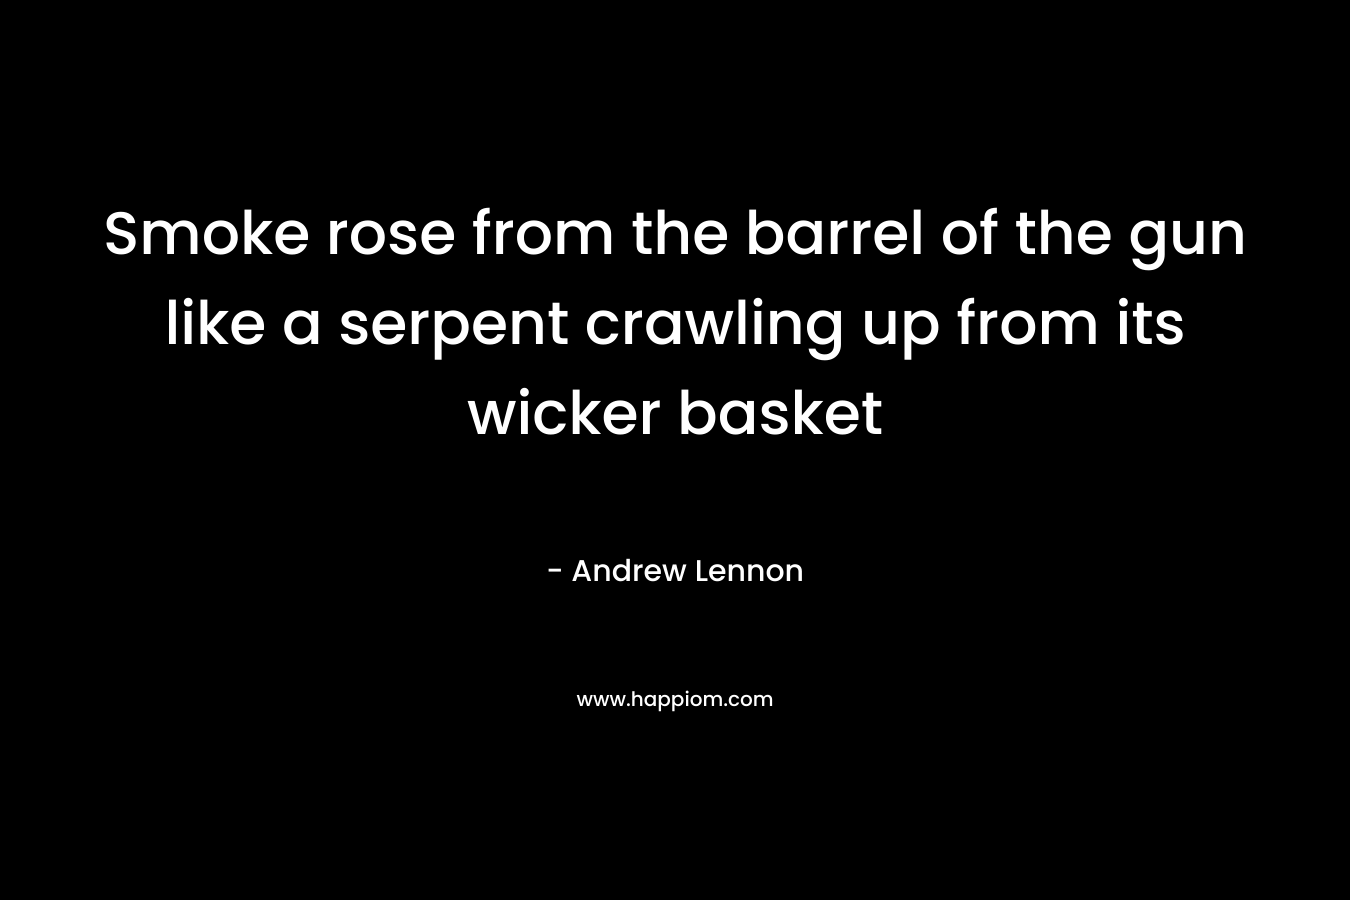 Smoke rose from the barrel of the gun like a serpent crawling up from its wicker basket – Andrew Lennon